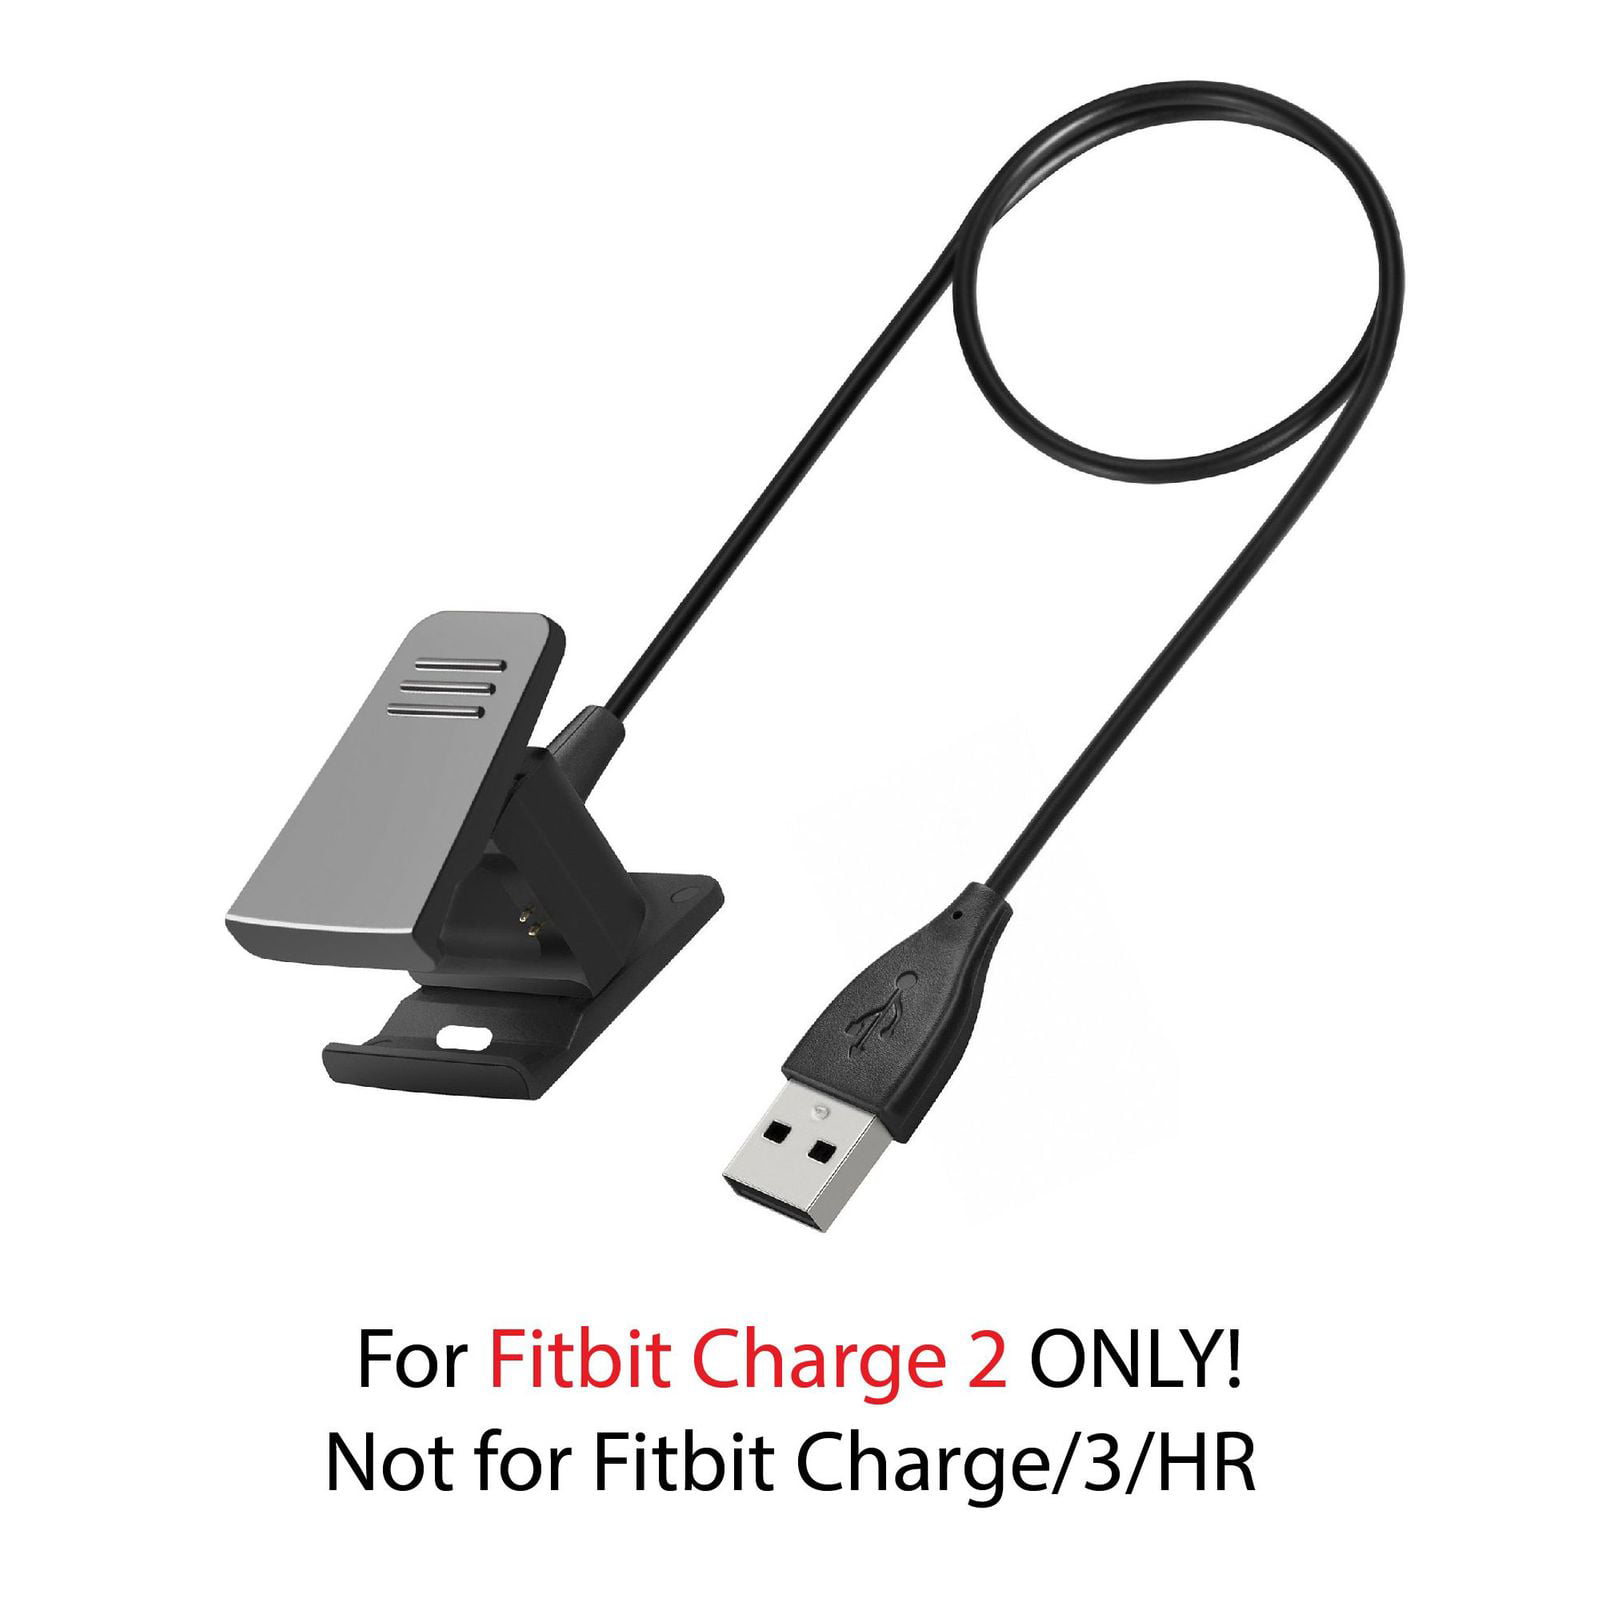 For Fitbit Alta HR Replacement USB Charger Charging Cable Cord 1ft 